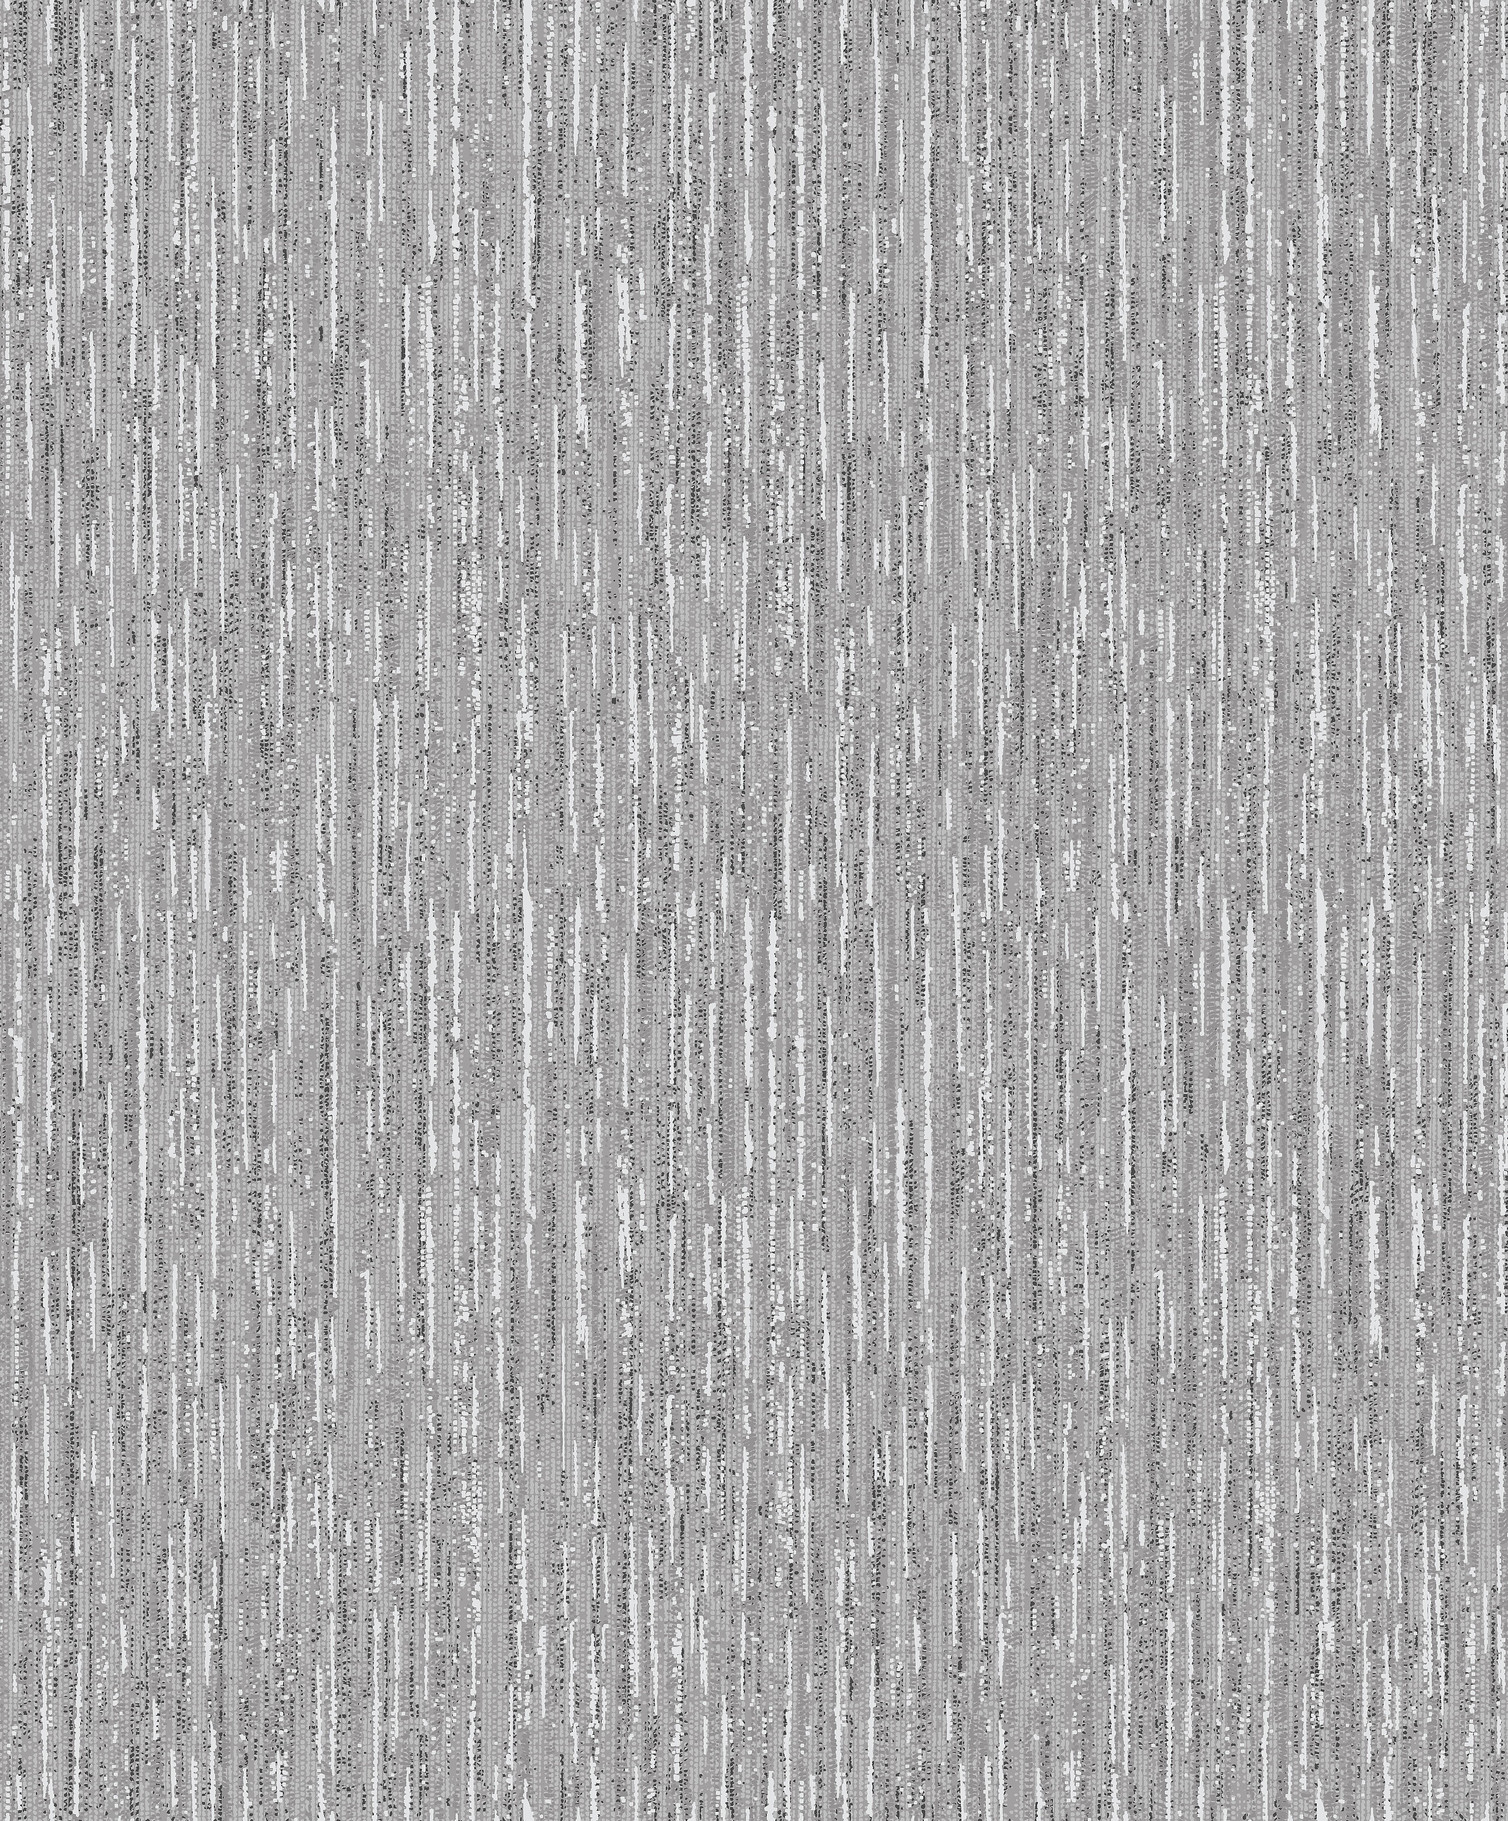 Grey Background With Textured Silver Fleck Pattern Tiny Black